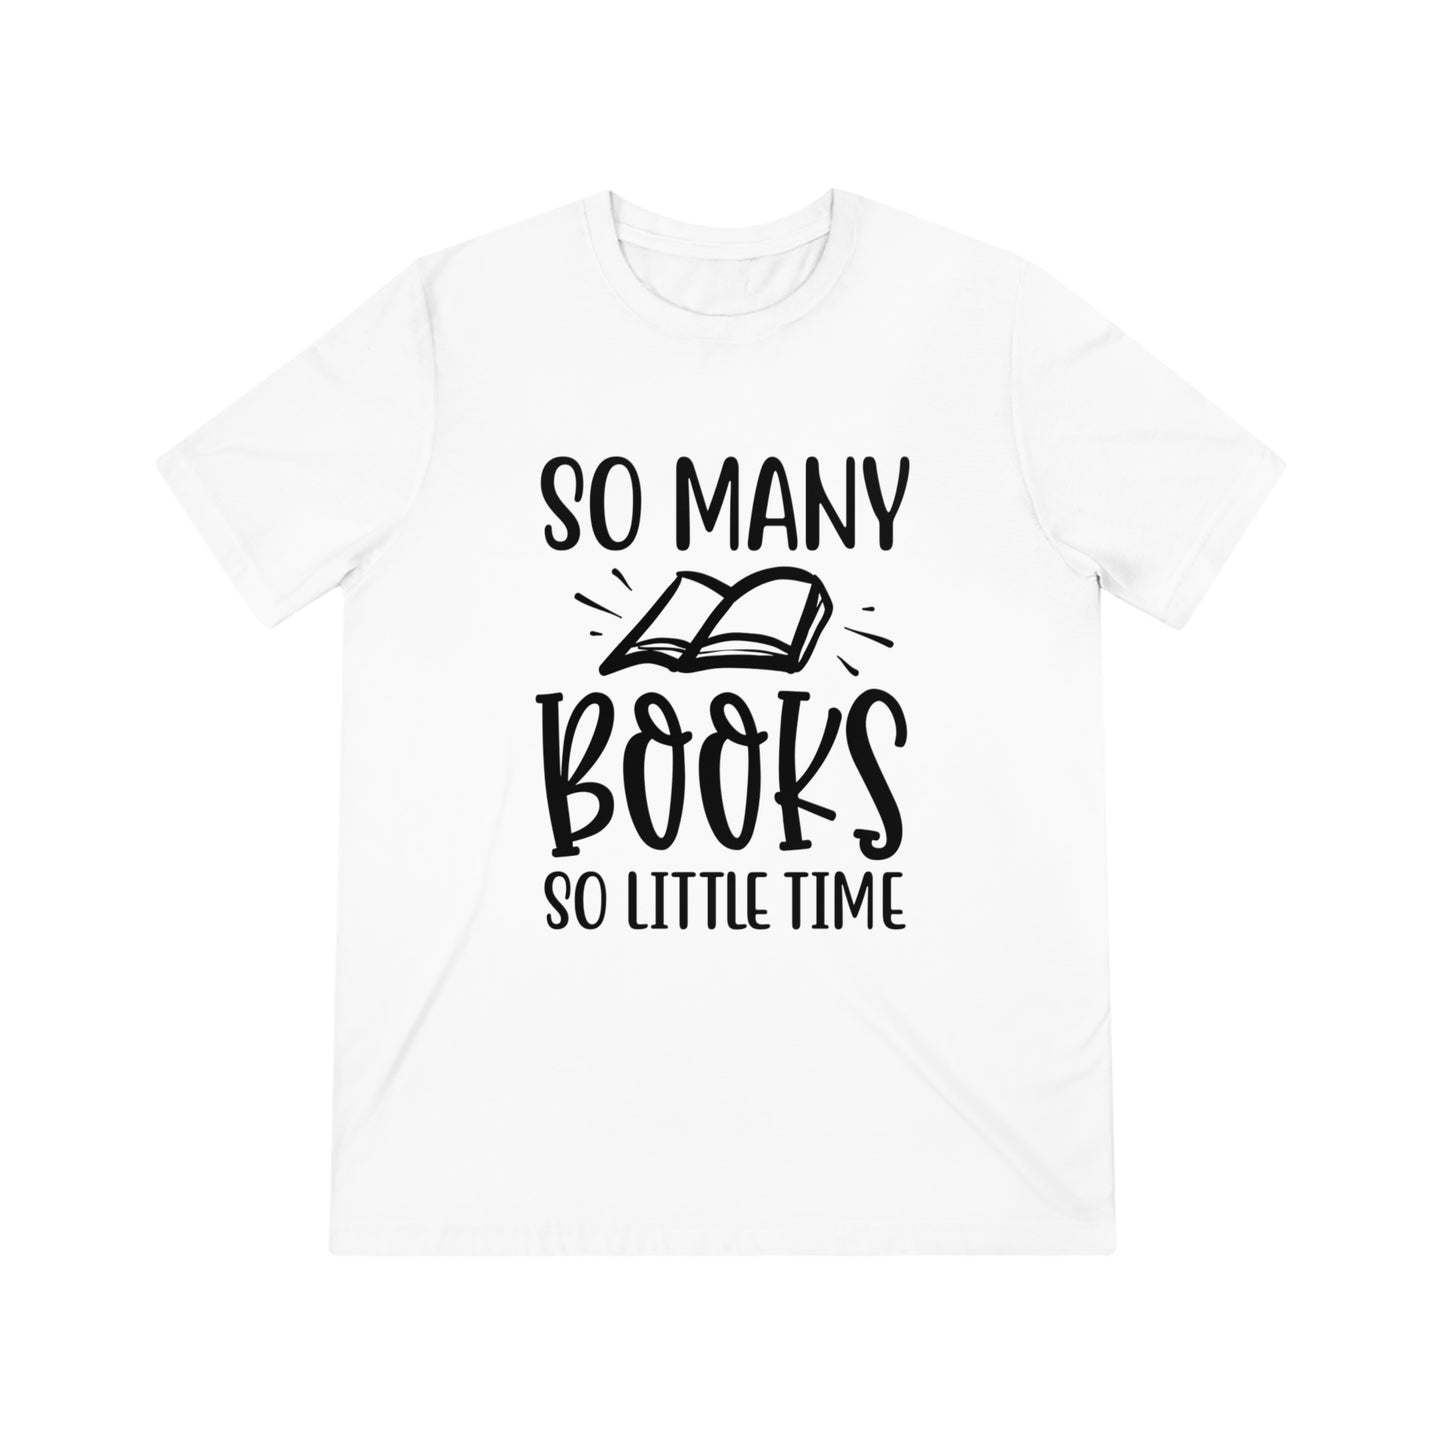 "So Many Books, So Little Time" Triblend Tee